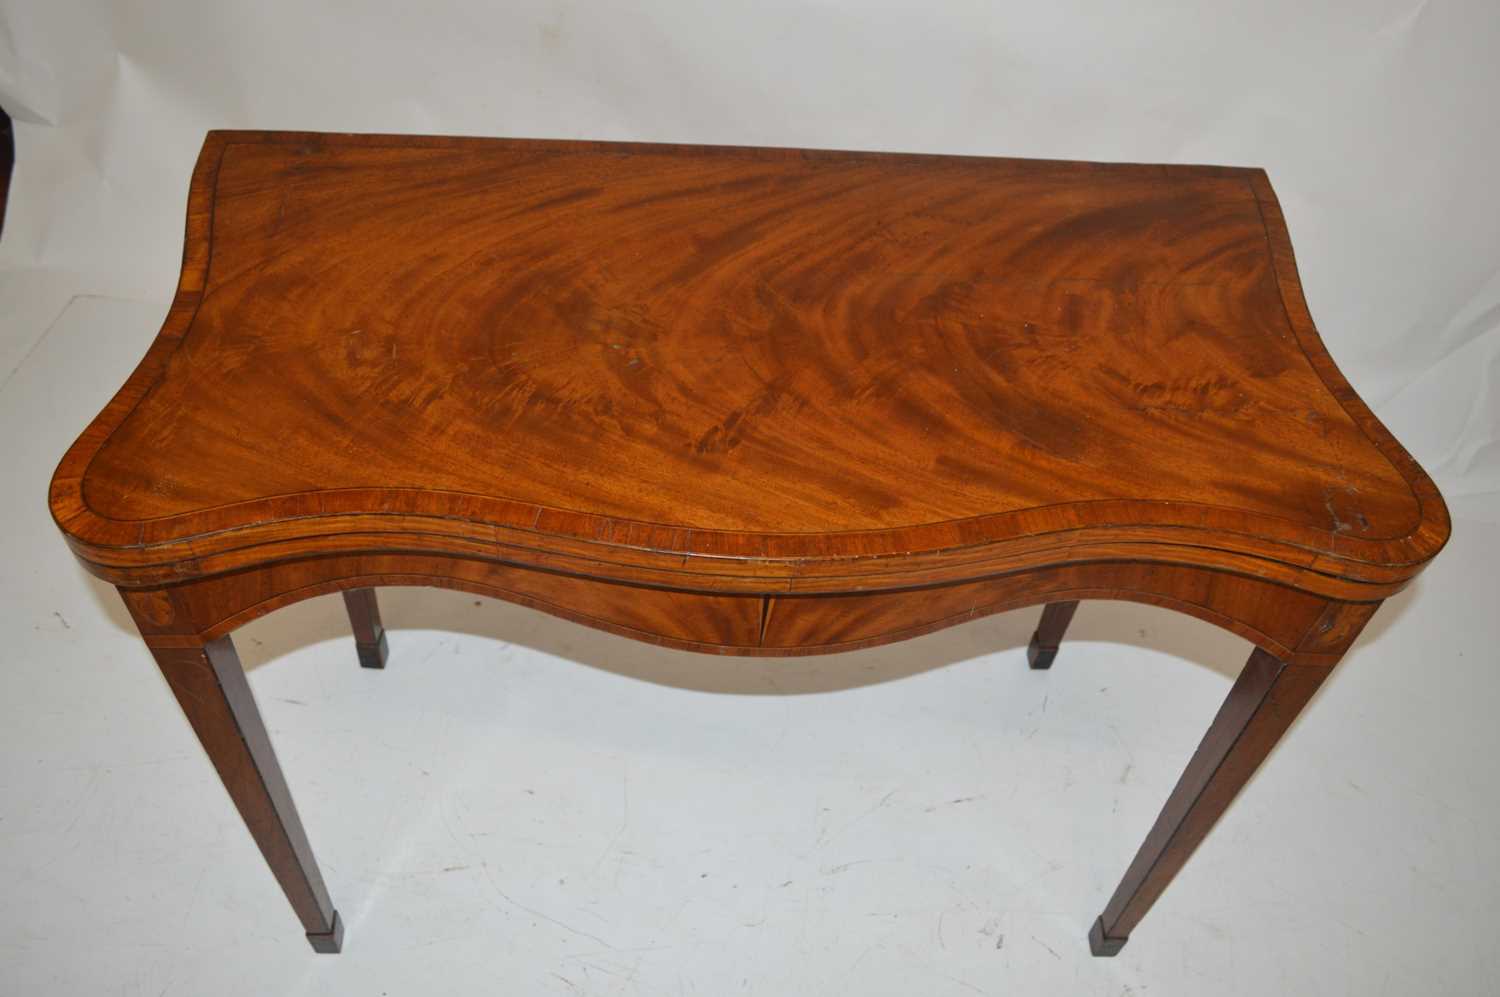 Early 19th-century fold-over card table - Image 2 of 8